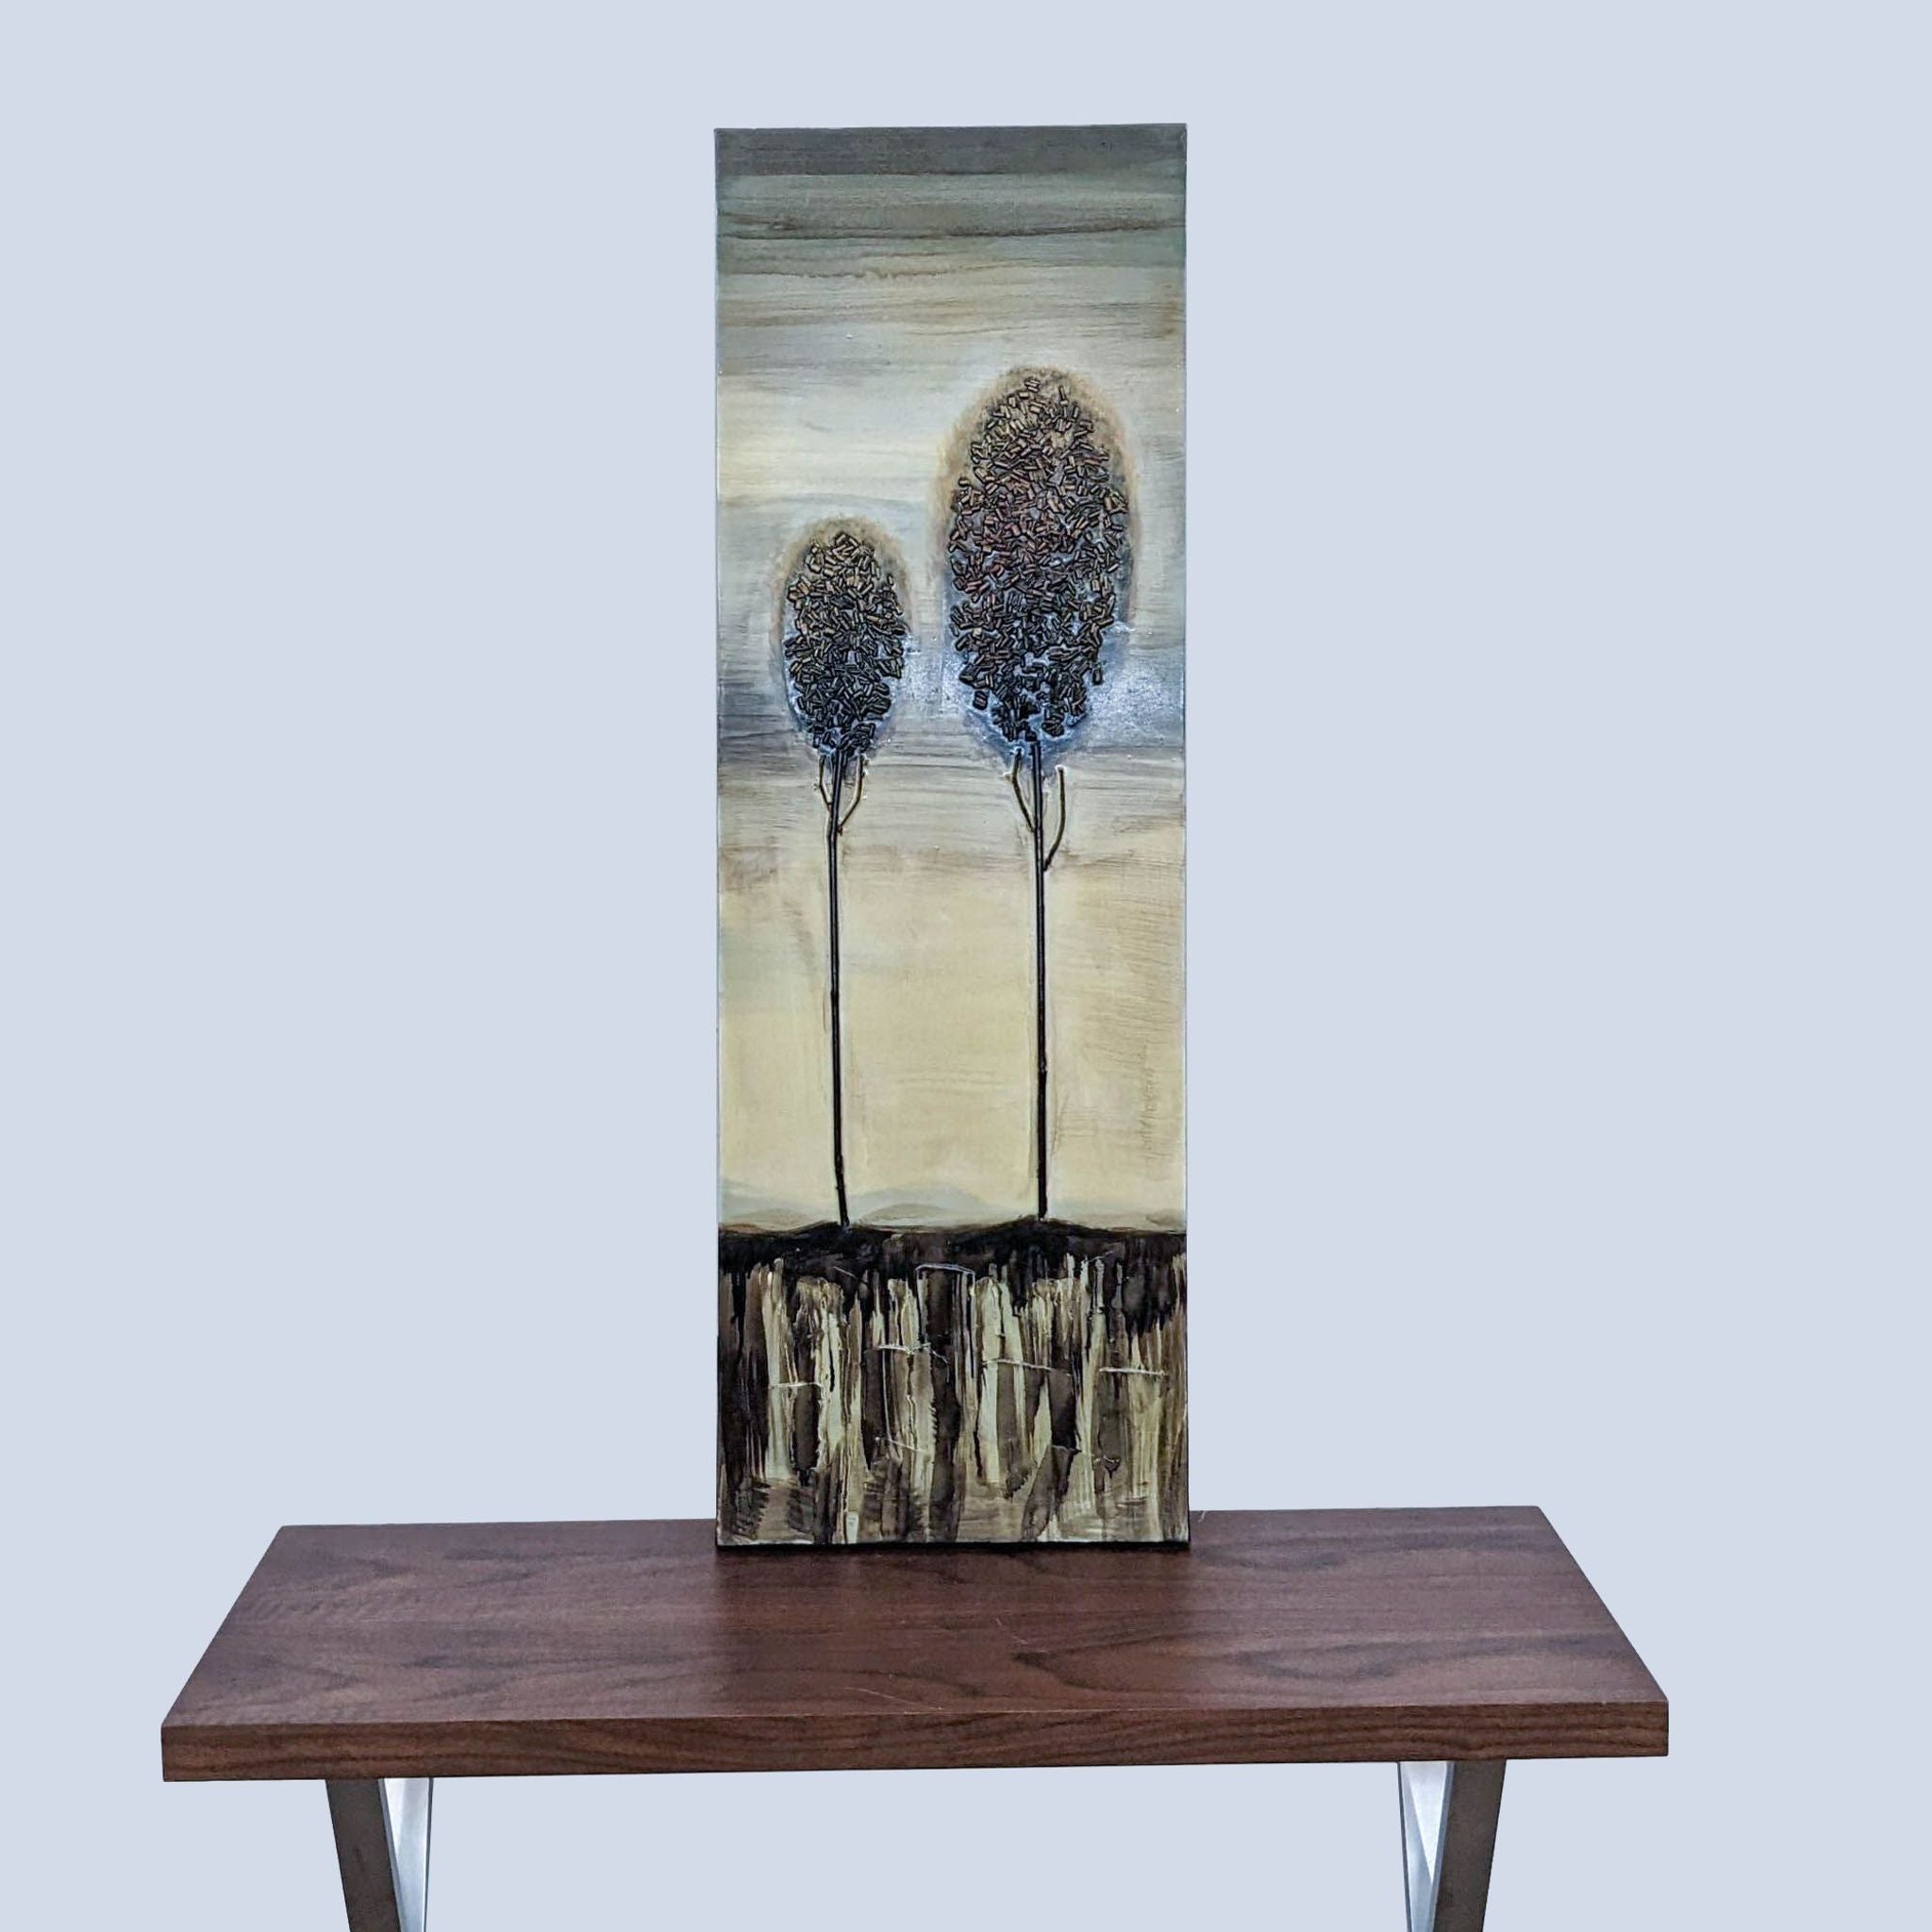 Reperch Mixed Media Botanical Art Print depicting abstract trees on canvas, displayed on a wood table.